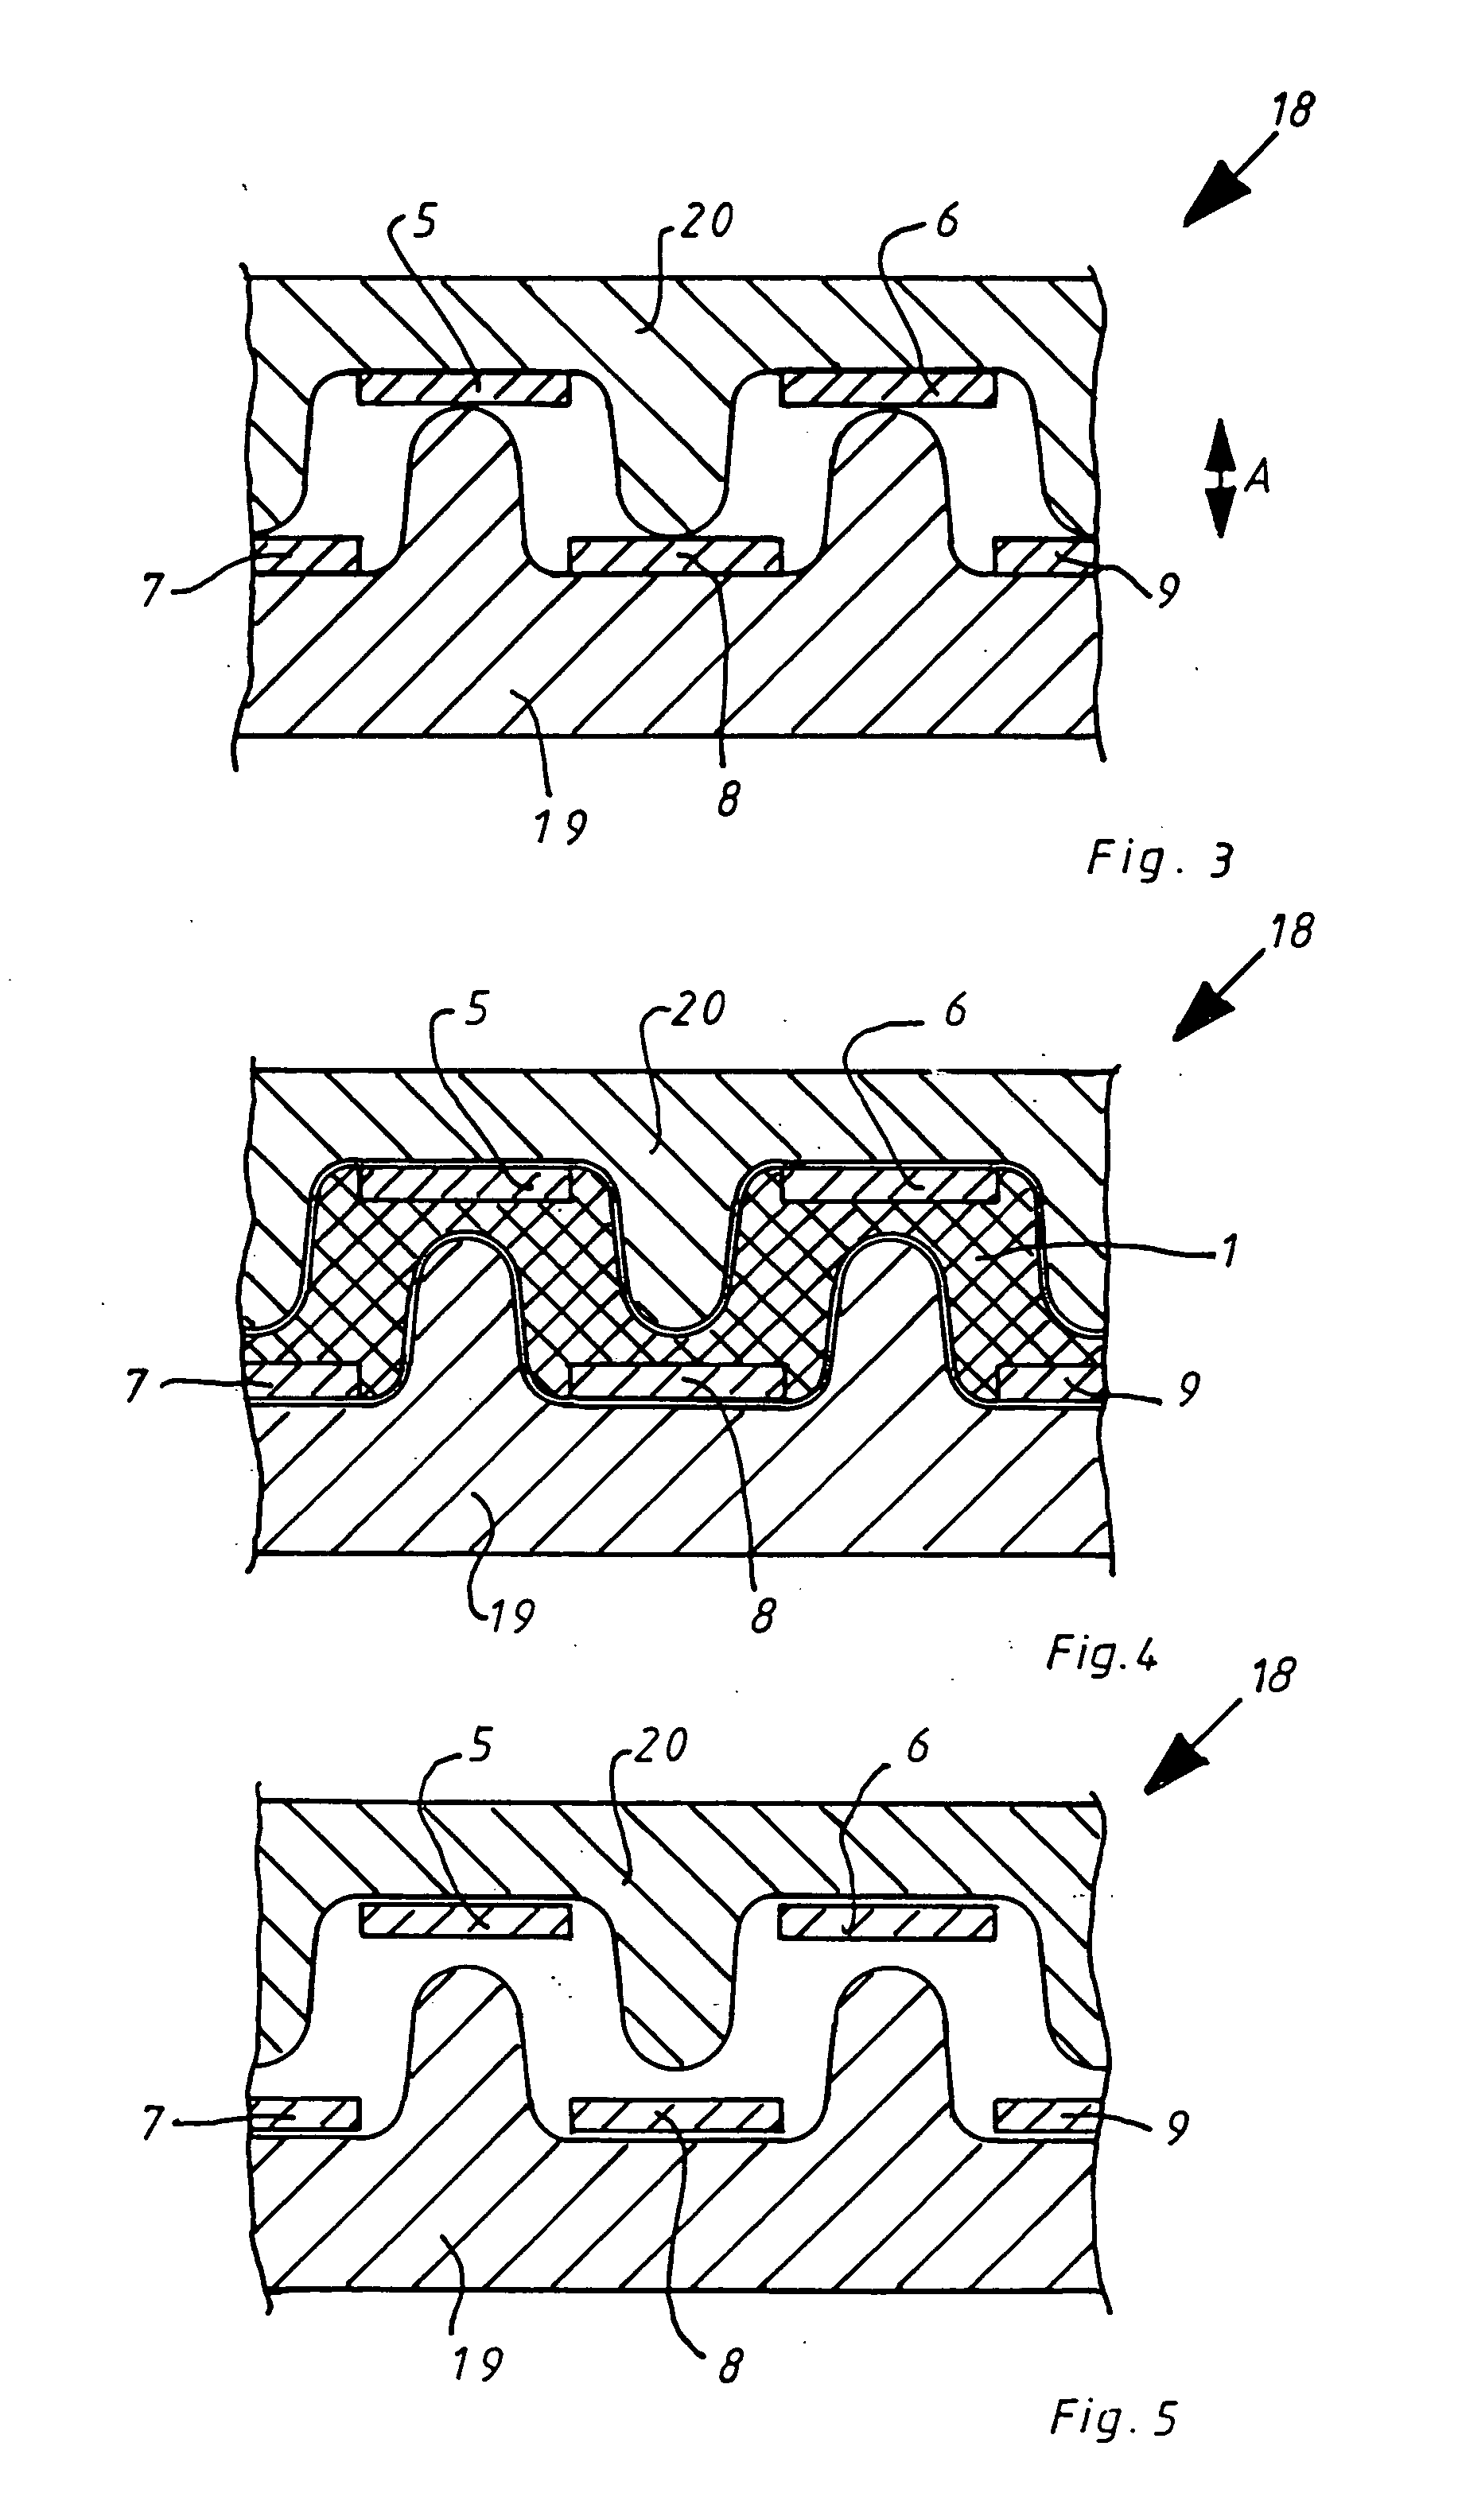 Method for the production of bipolar plates or electrode plates for fuel cells or electrolyzer stacks, method for the production of a stack of bipolar plates or electrode plates, as well as a bipolar plate or electrode plate